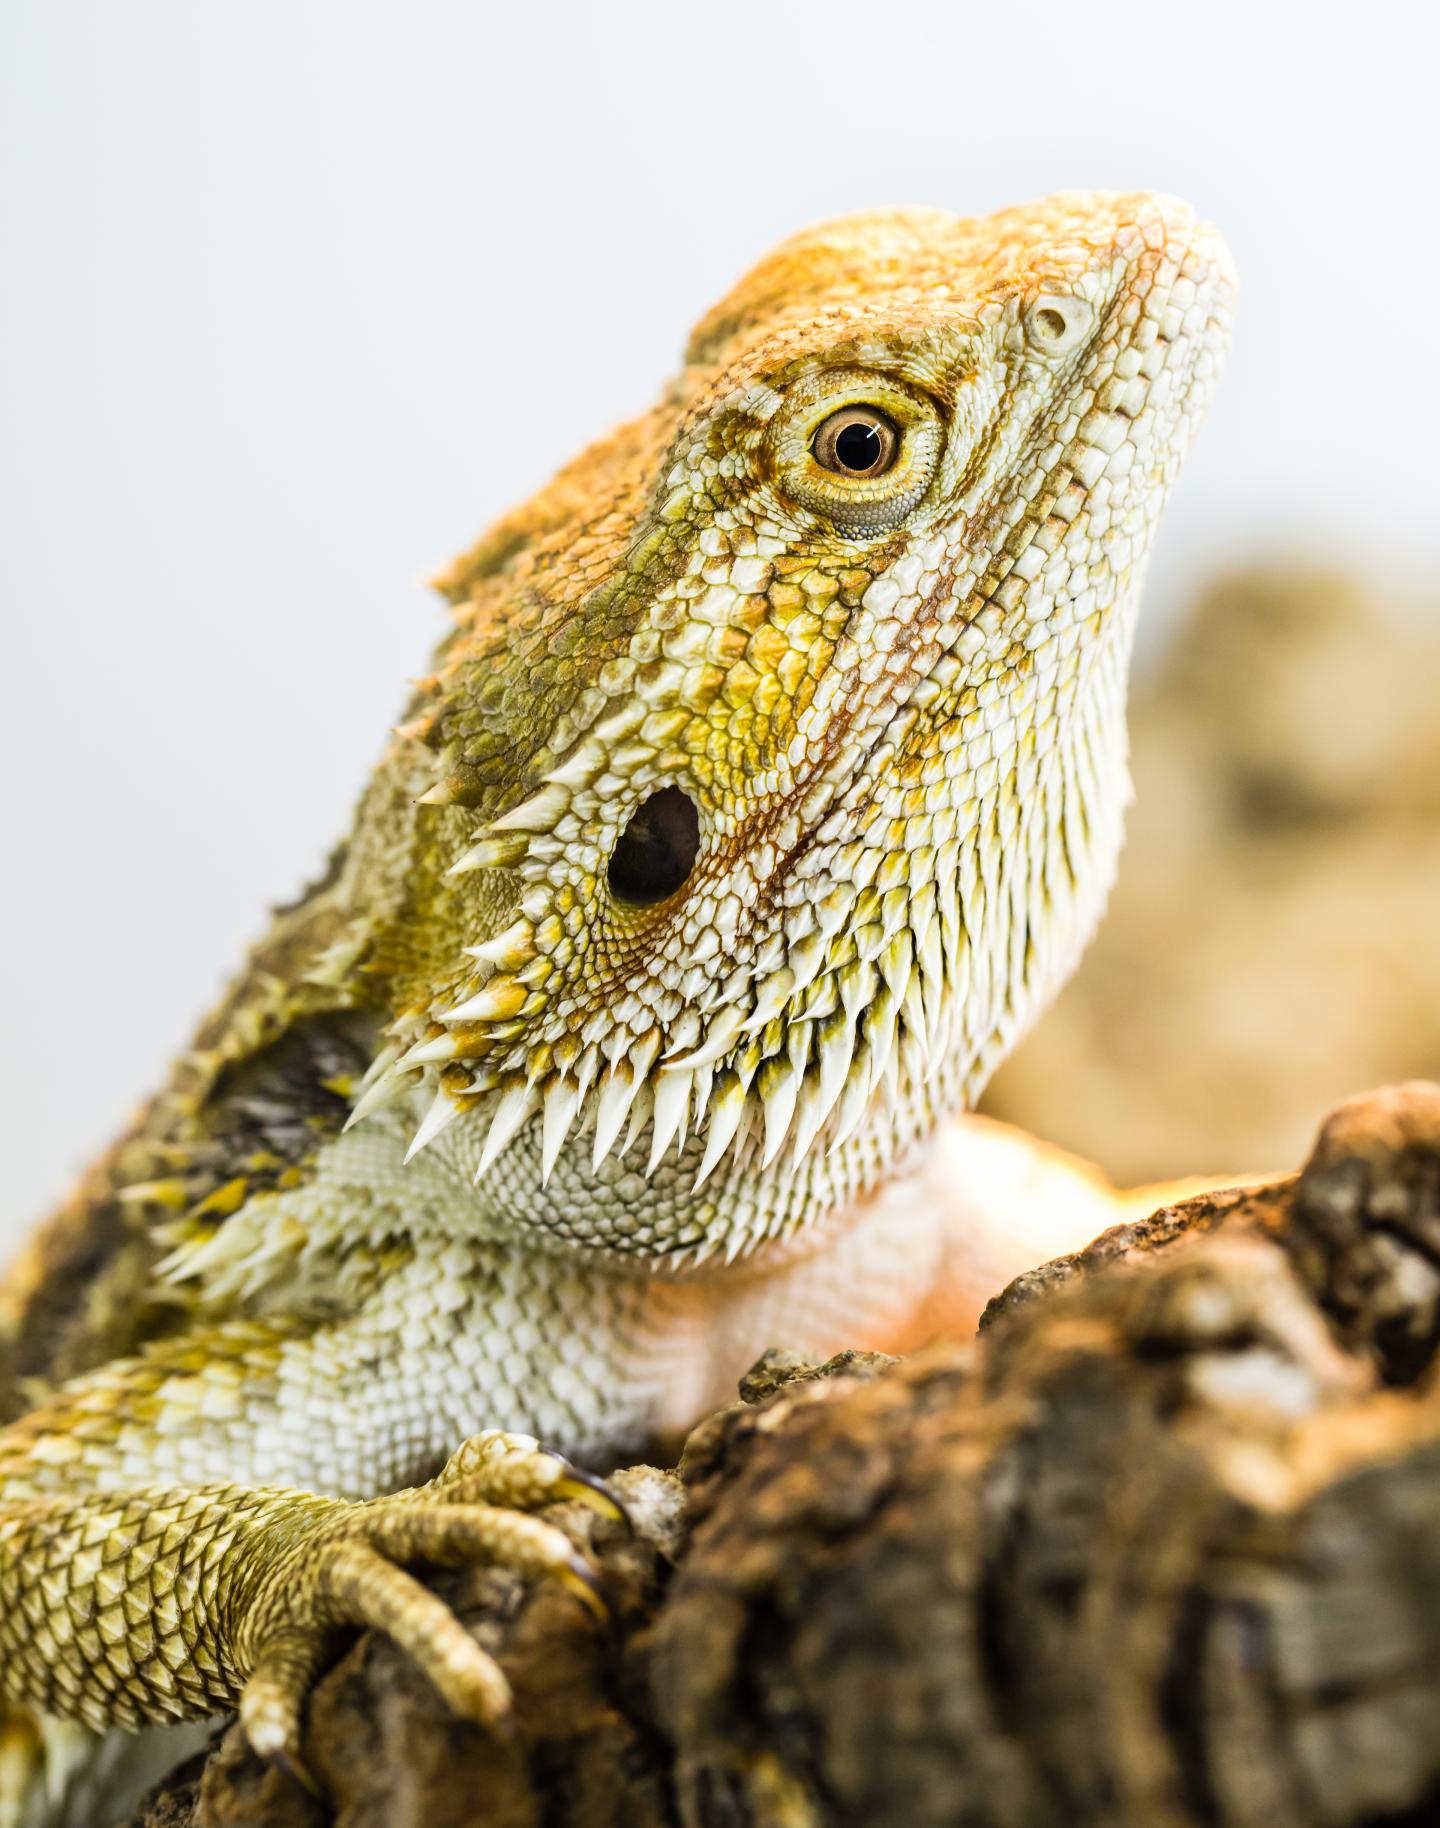 Reptiles Share Sleep Patterns with Mammals and Birds After All (1 of 2)